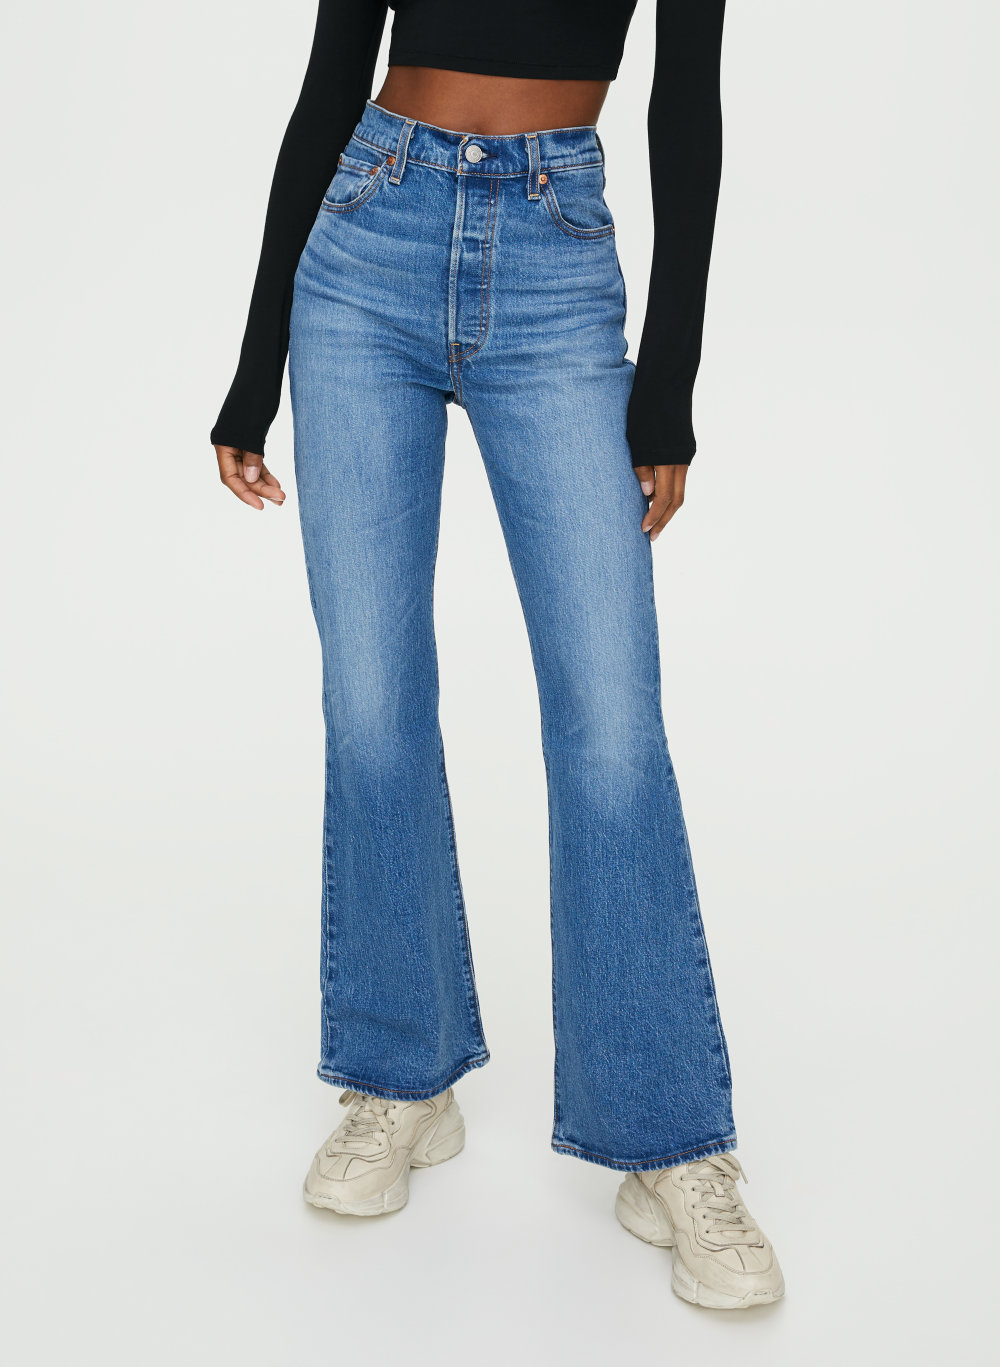 levis jeans flare